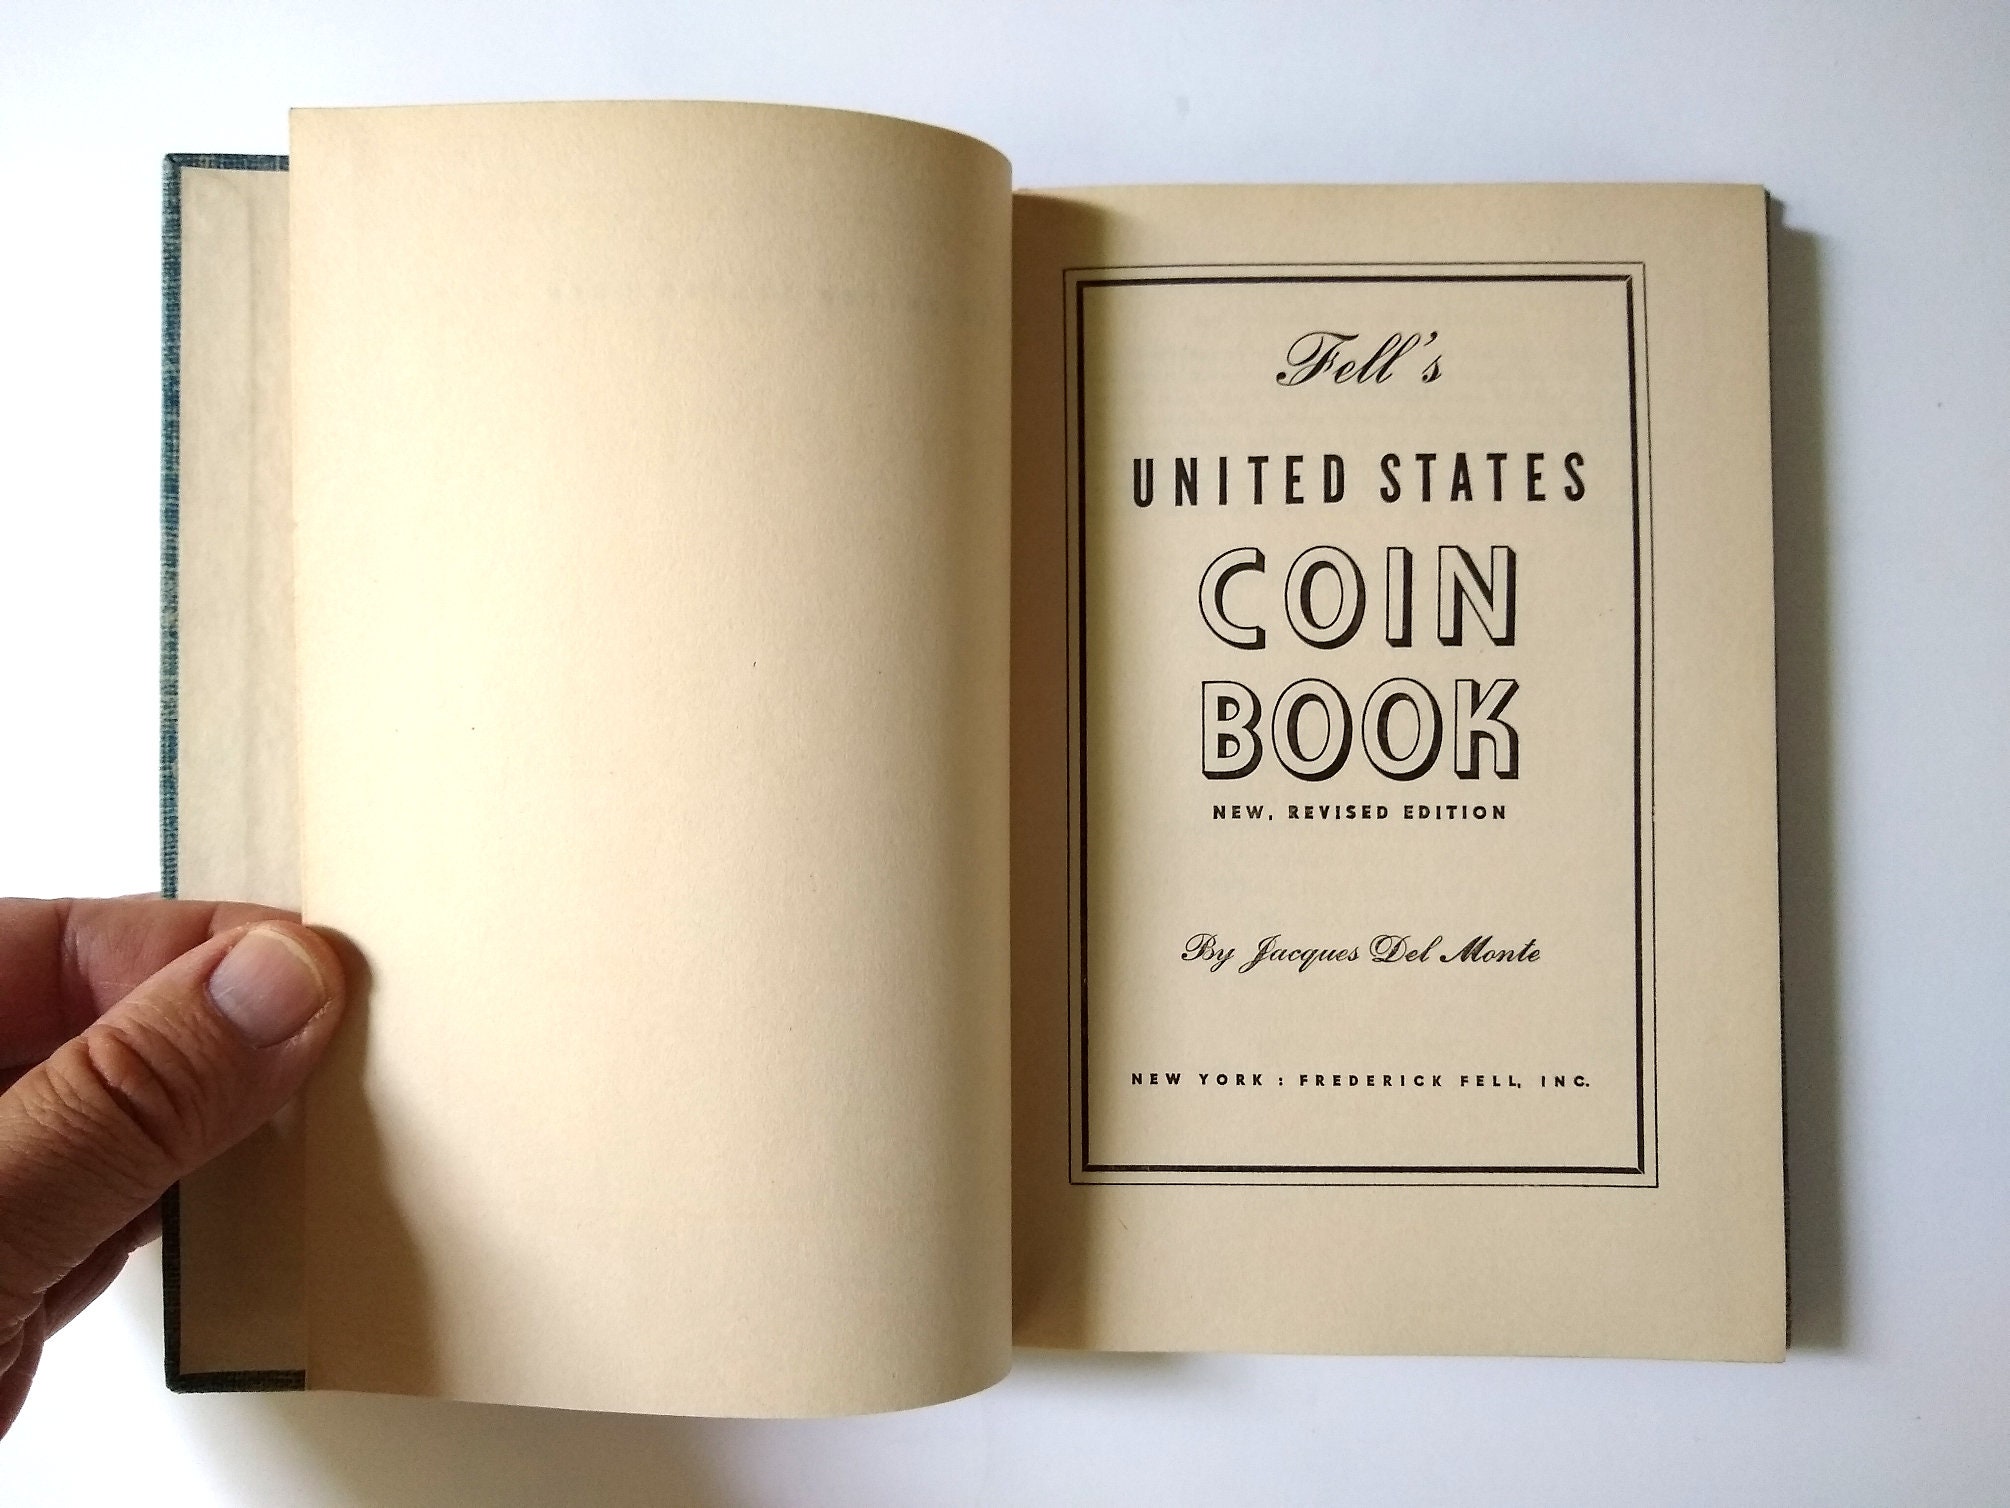 1952 Fell's United States Coin Book New Revised Edition Hardcover